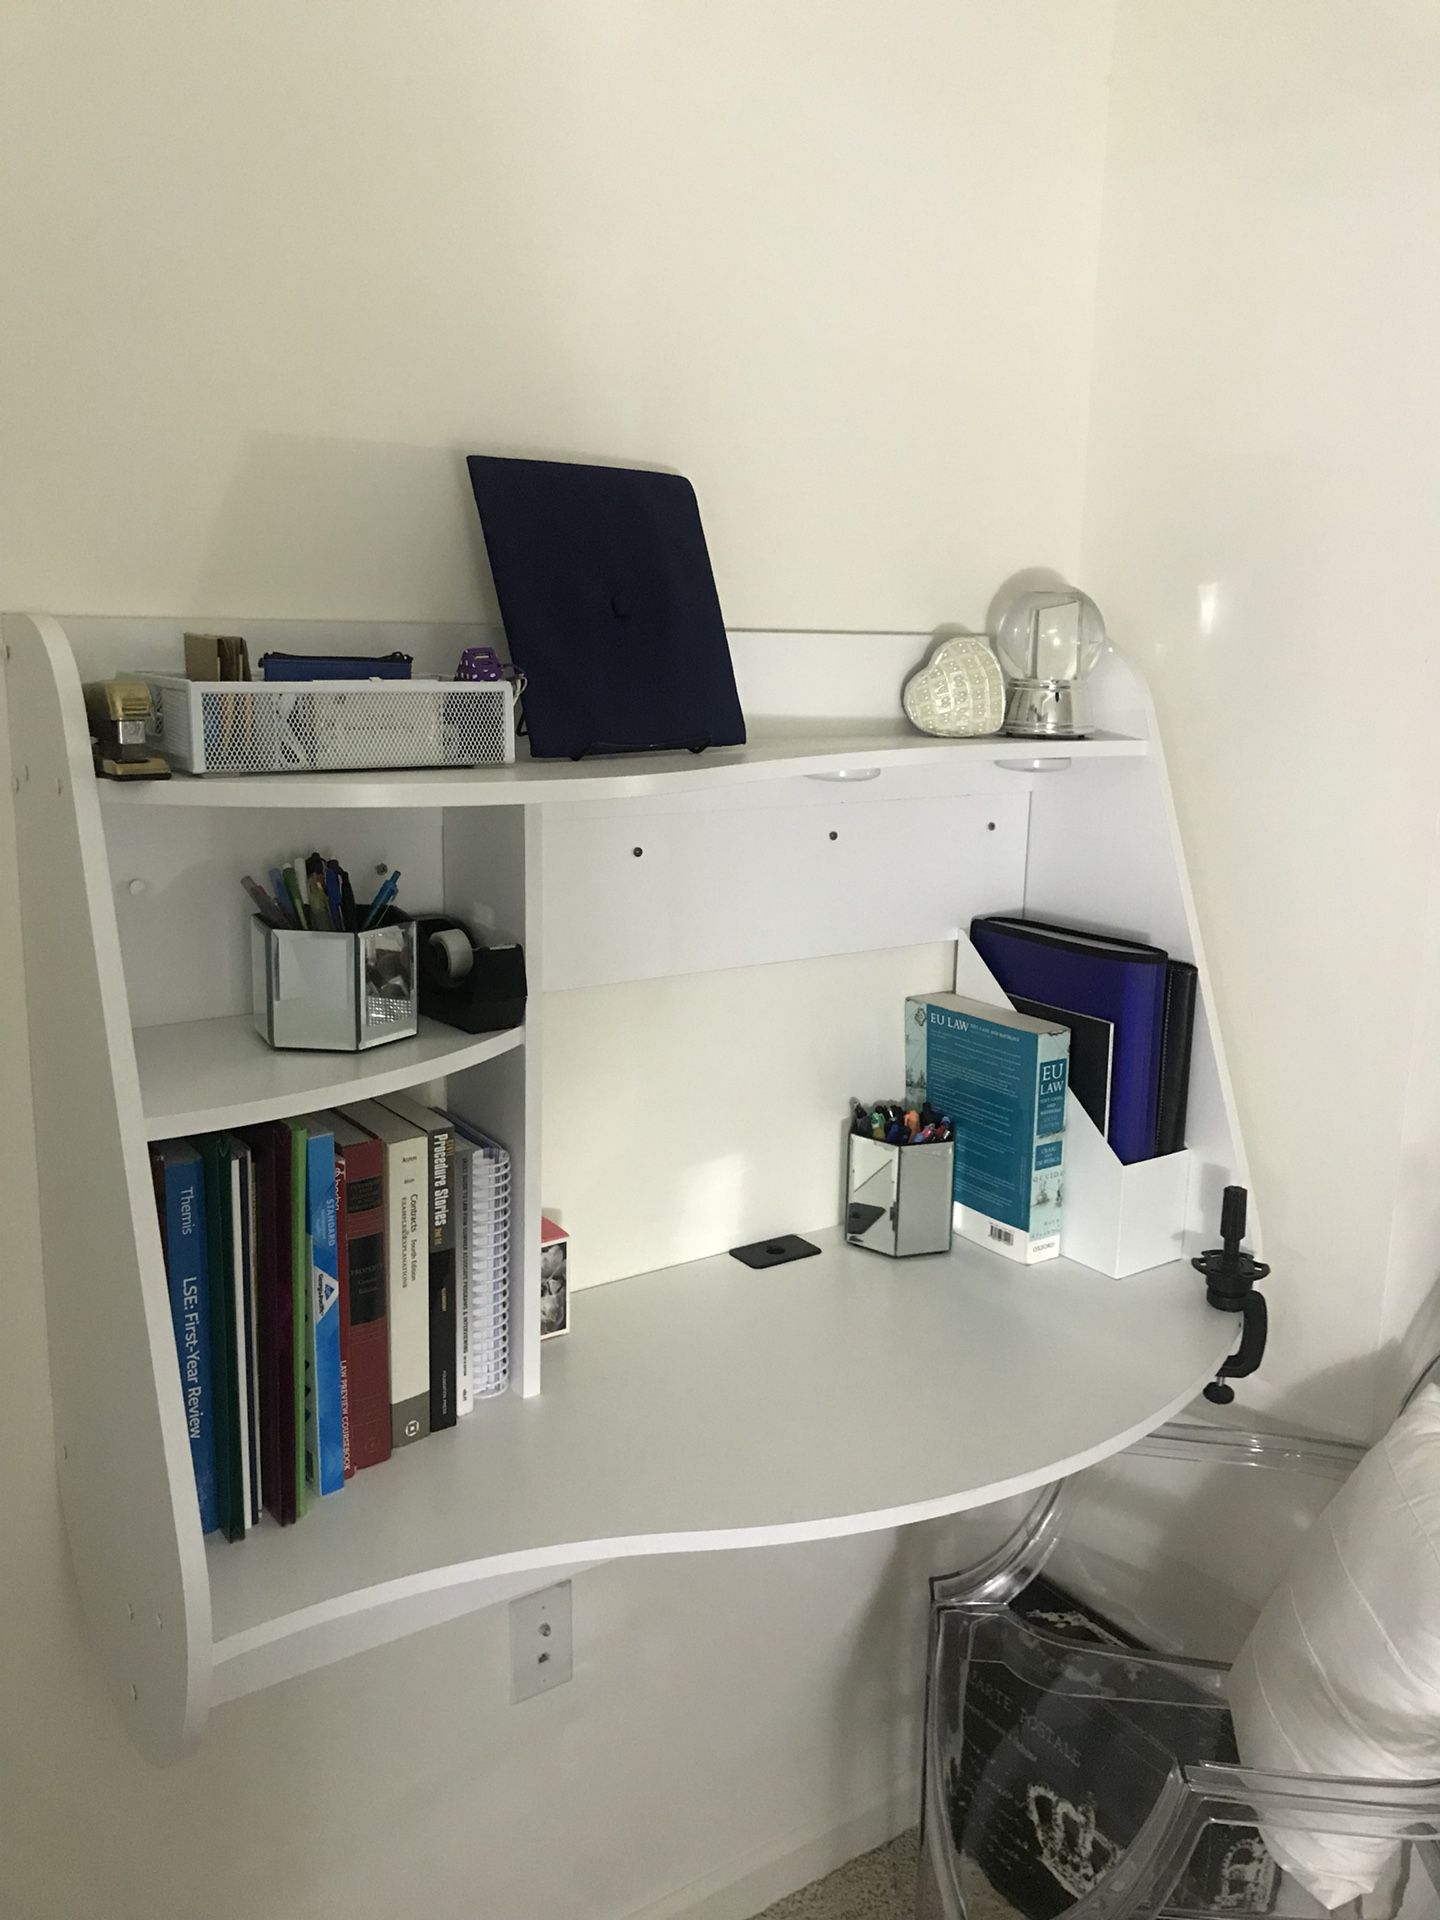 NEW FLOATING MOUNTED WHITE DESK WITH STORAGE AND CORD ORGANIZER